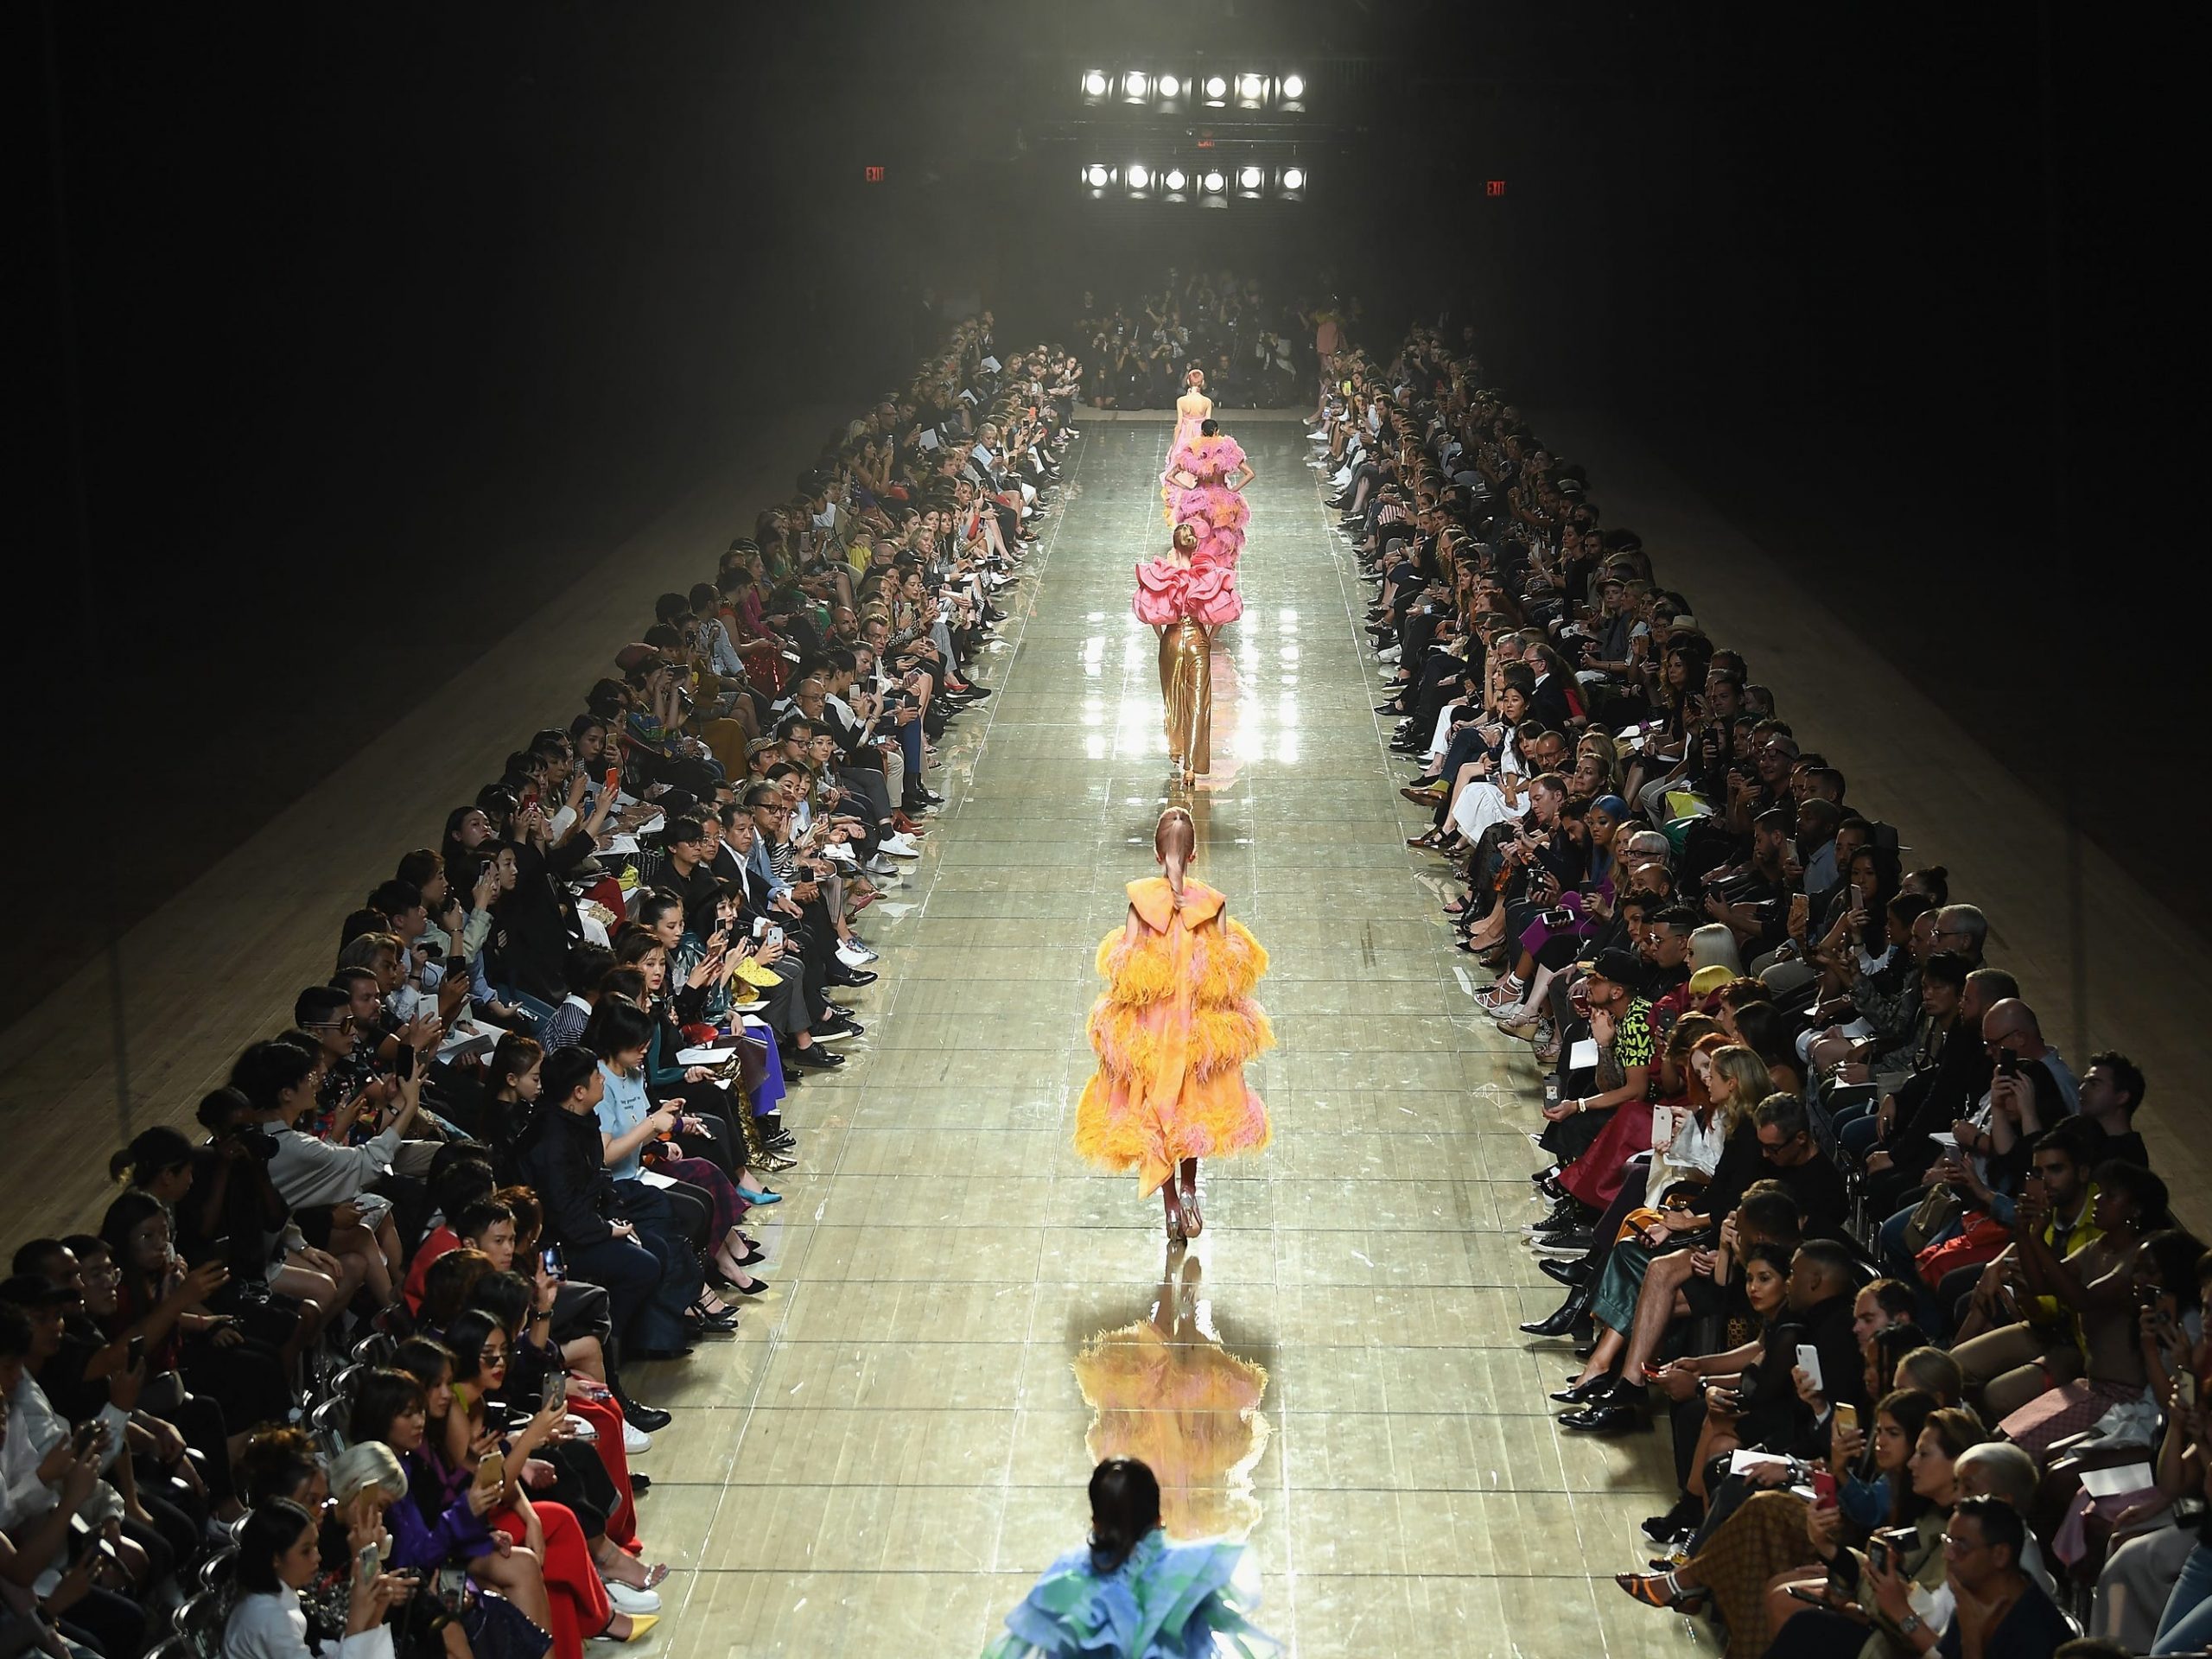 Models walk down a runway surrounded by spectators at a Marc Jacob fashion show.